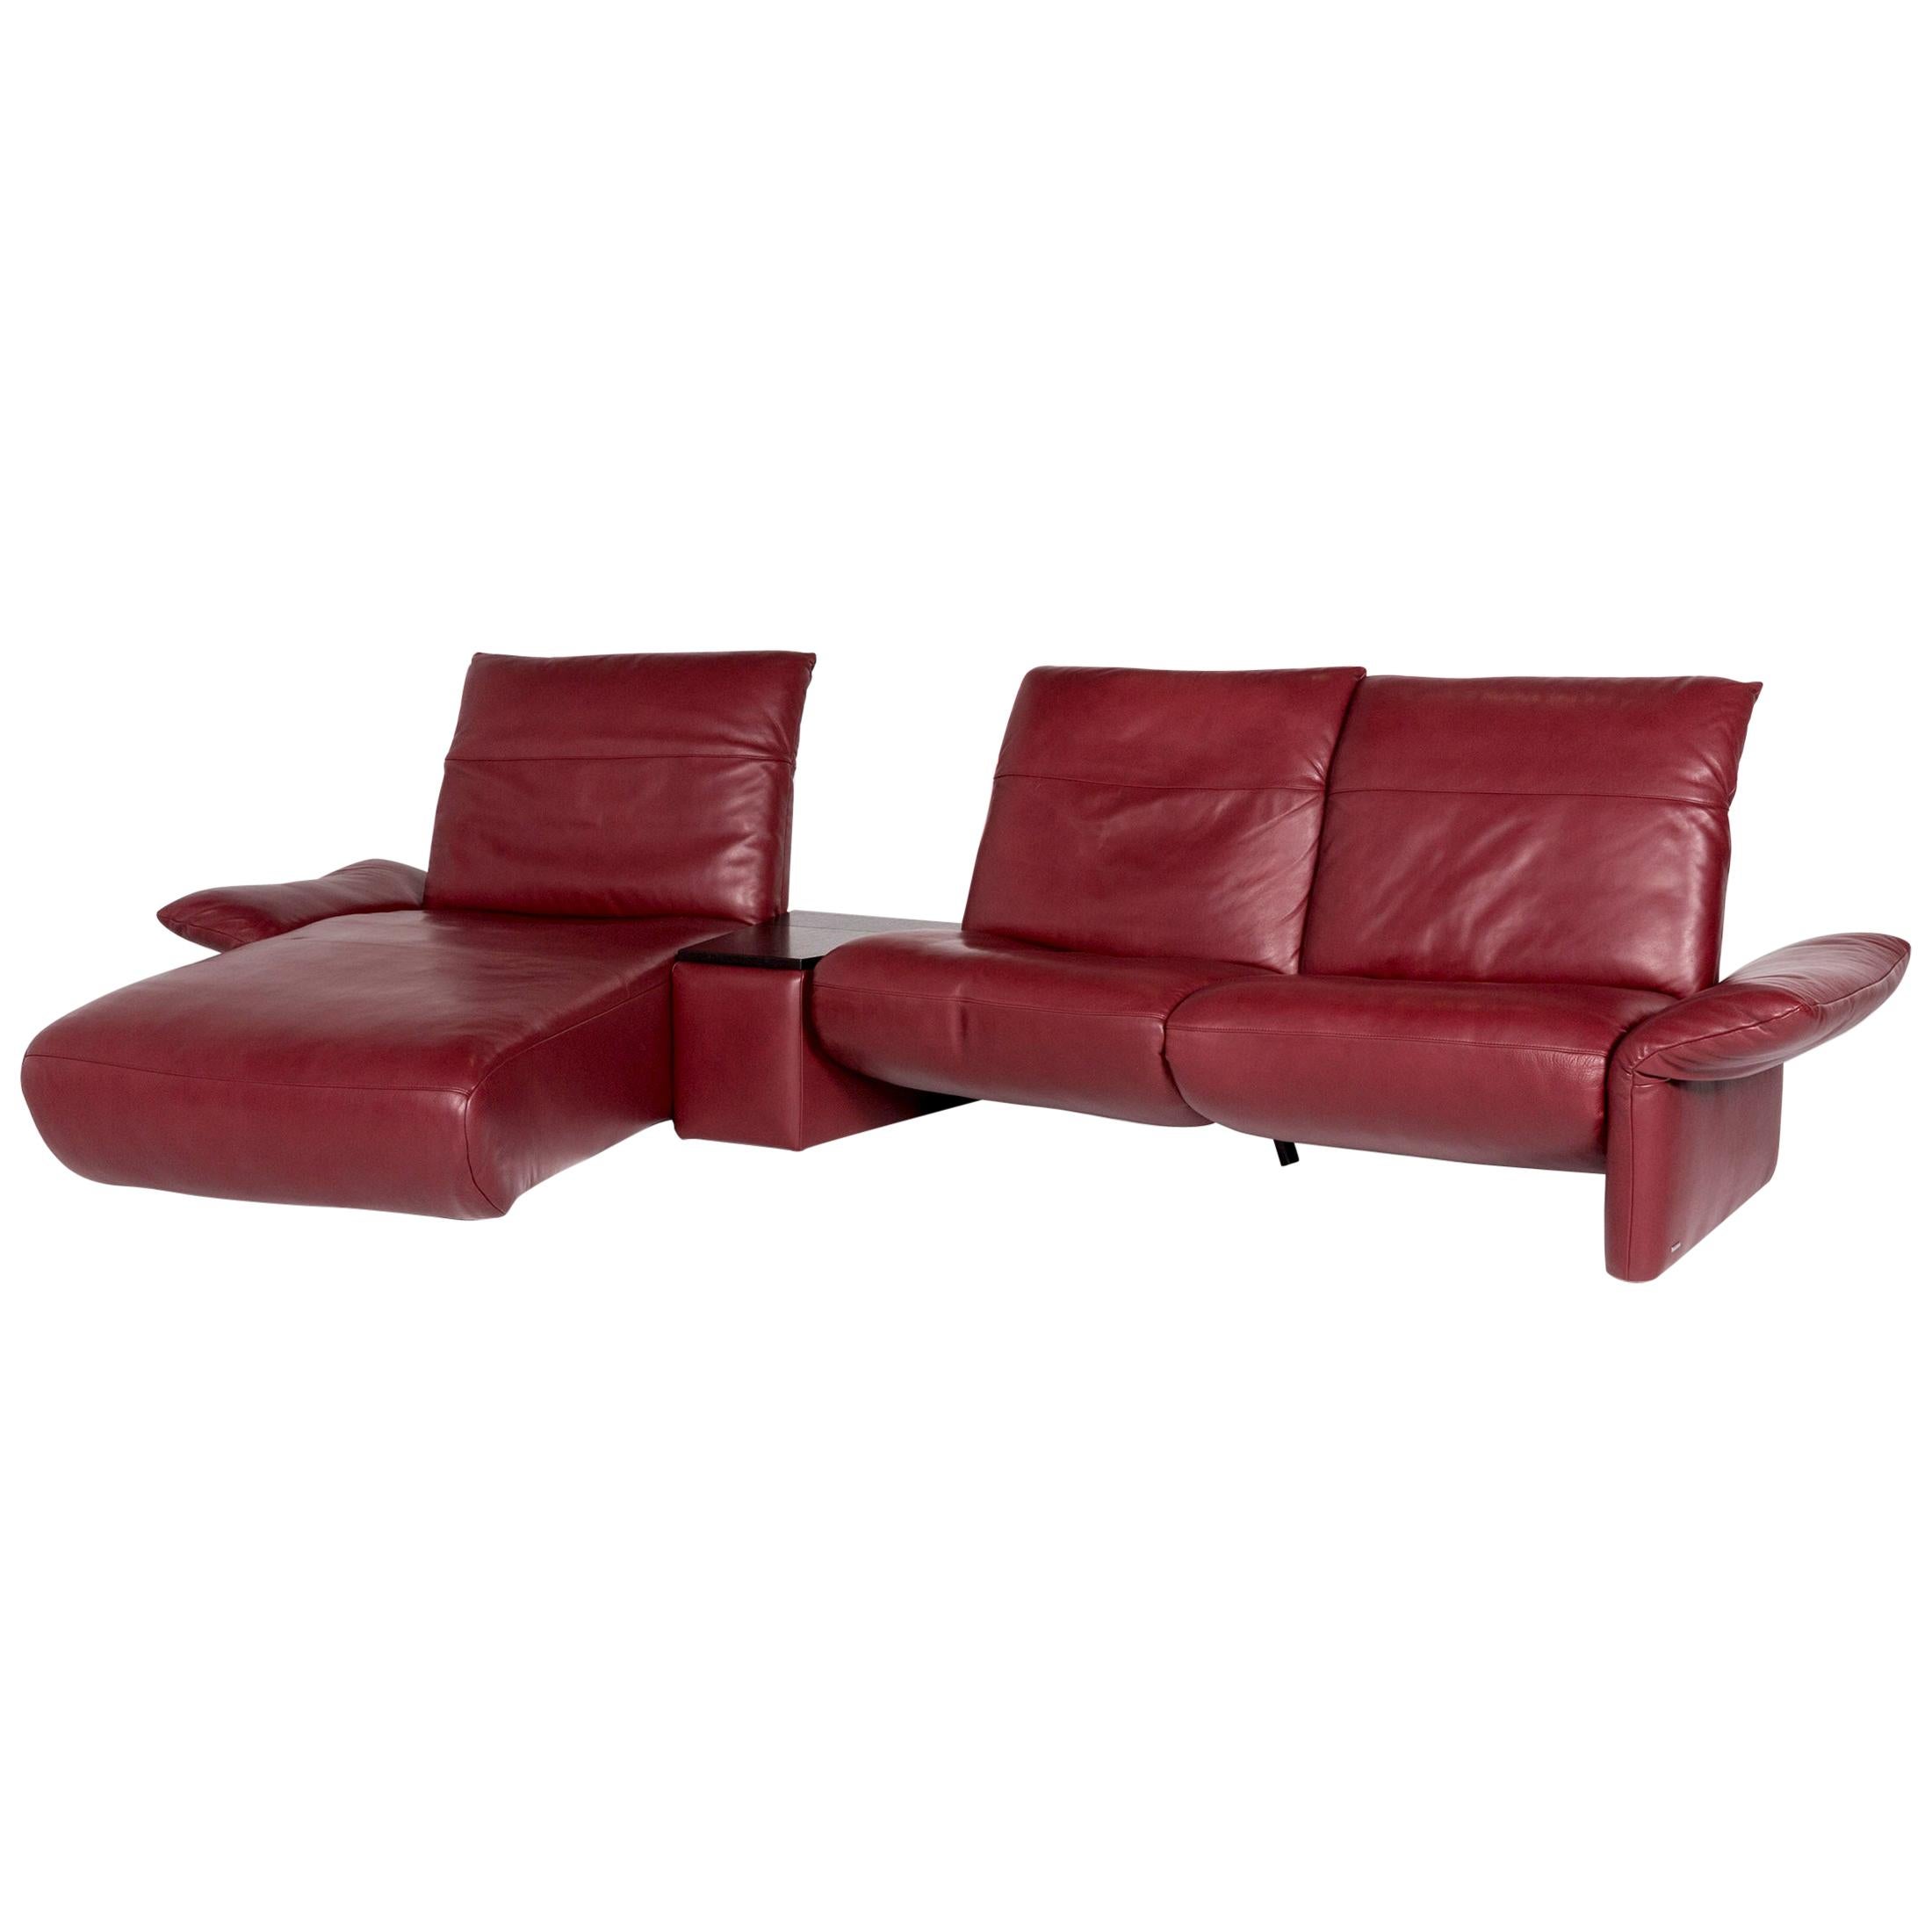 Koinor Elena Leather Corner Sofa Red Sofa Function Relaxation Couch For Sale